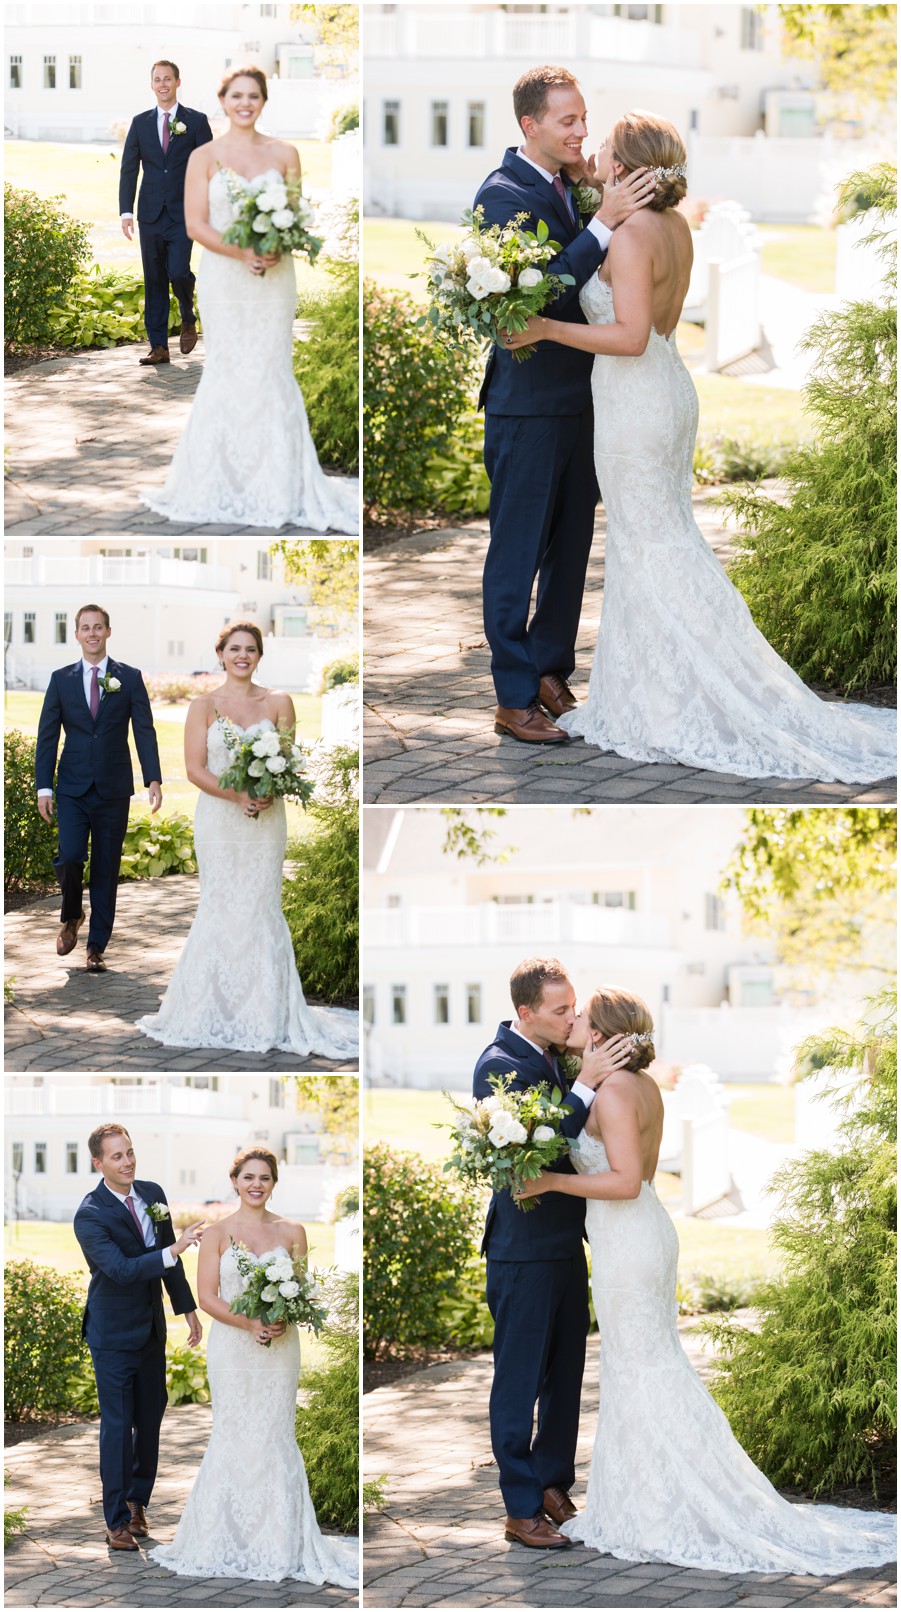 "First Look" between bride and groom at The Oaks Waterfront Inn in St. Michales, MD by Melissa Grimes-Guy Photography